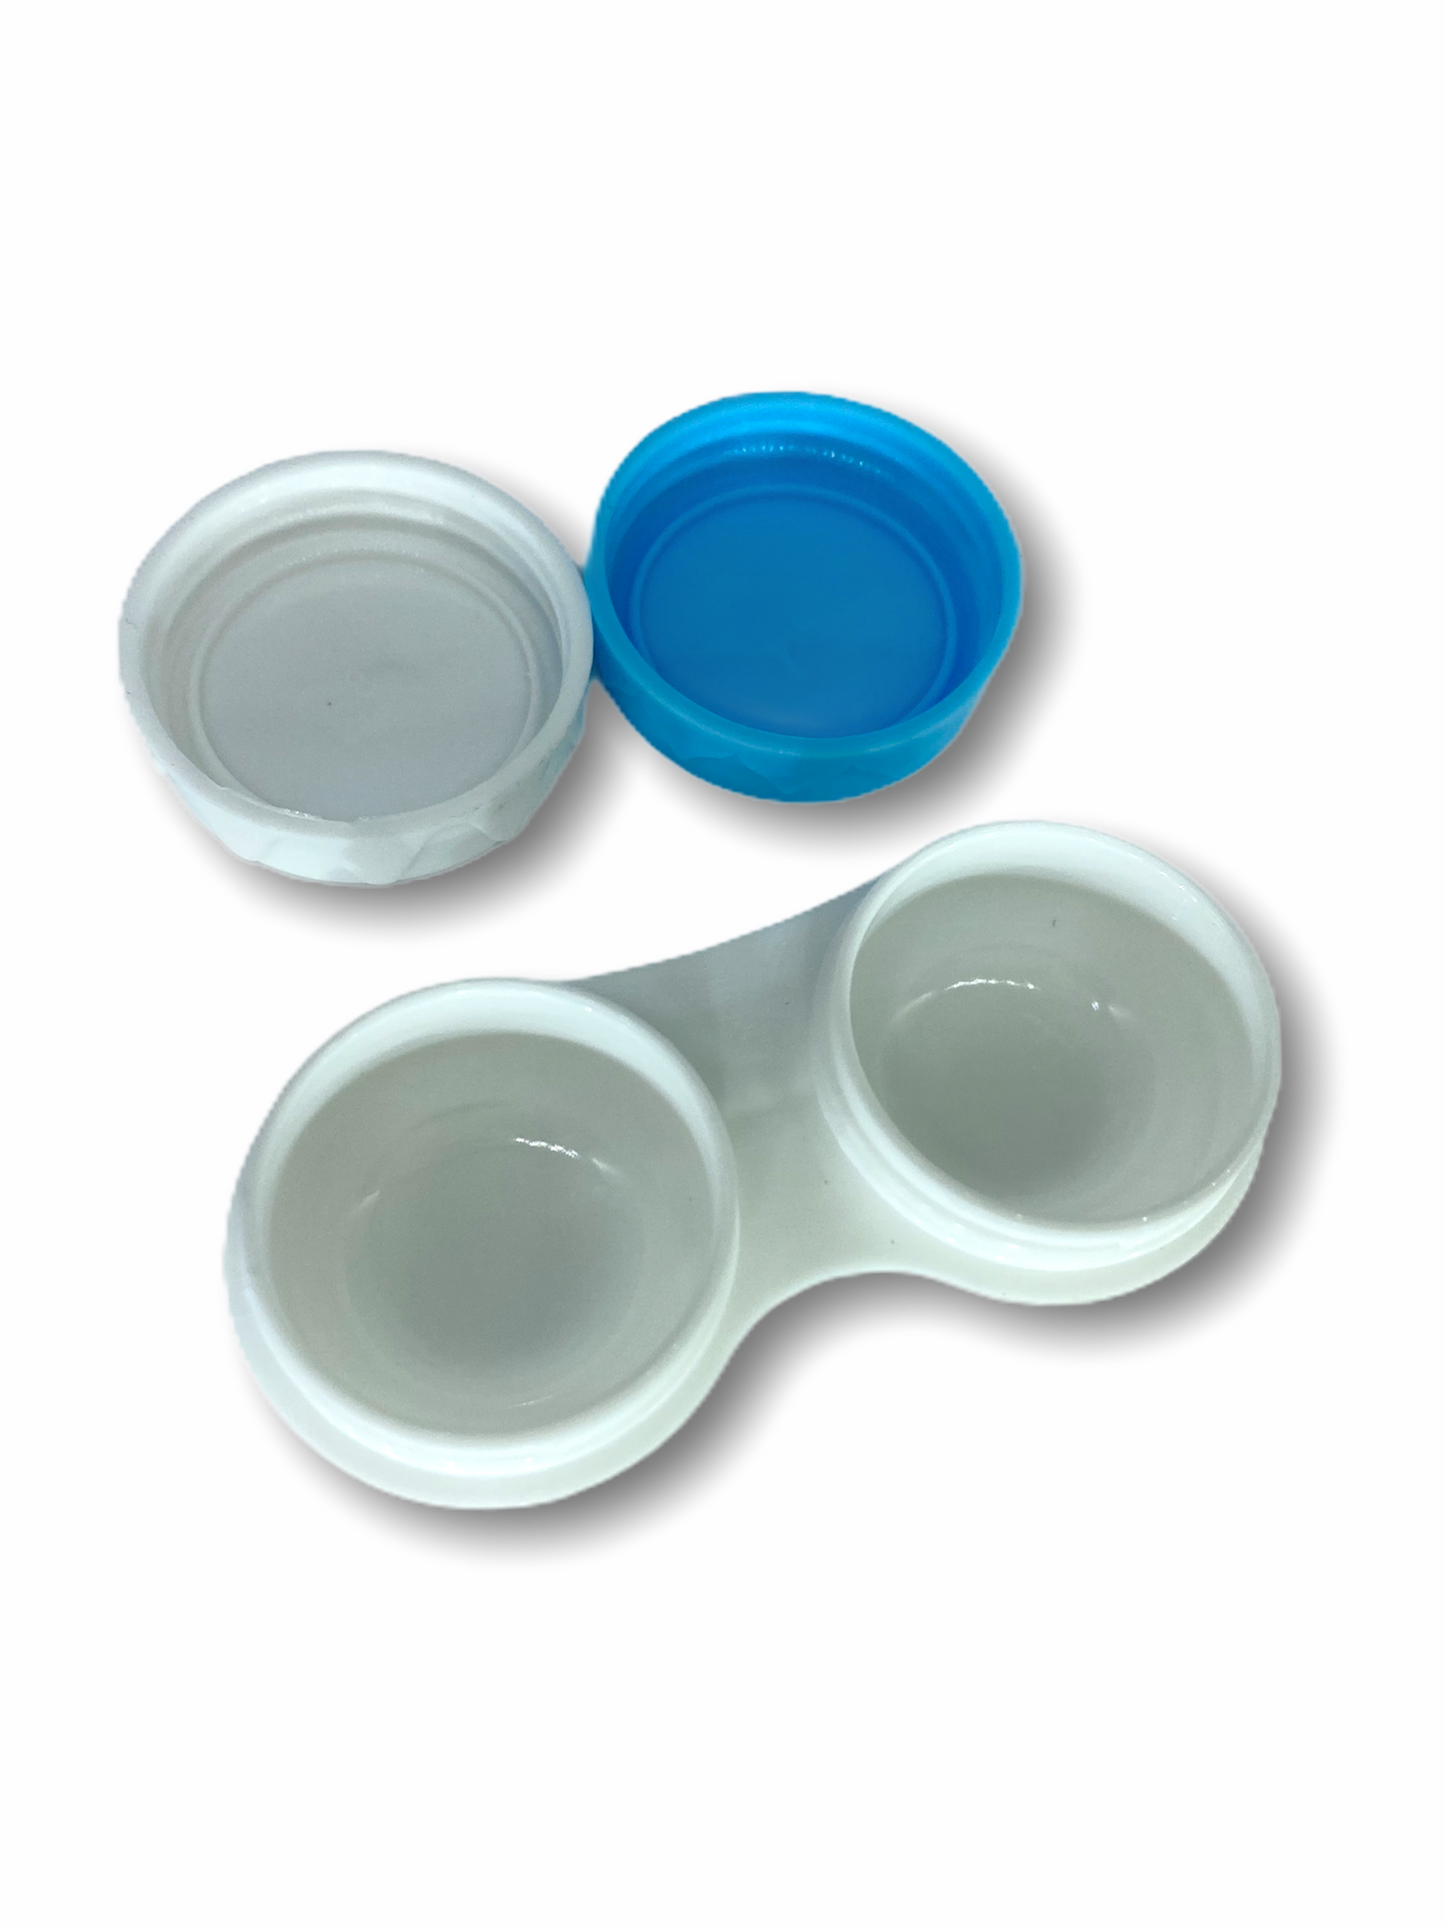 SALE- CONTACT LENSES STORAGE CASES *CLEARING OUT OVERSTOCK*